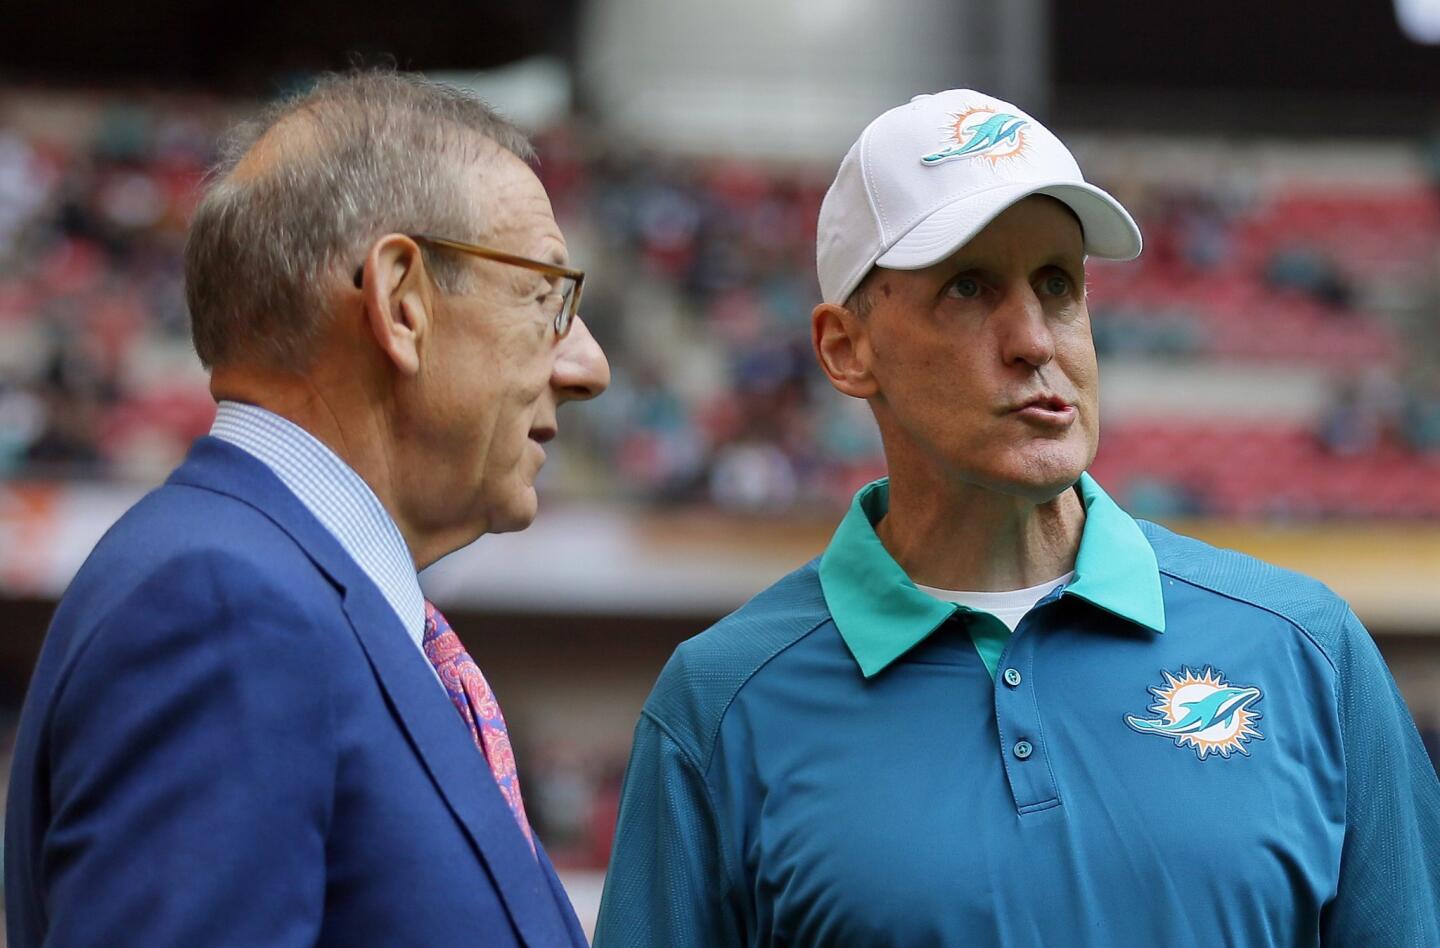 FILE - In this Oct. 4, 2015, file photo, Miami Dolphins owner Stephen Ross, left, and Miami Dolphins head coach Joe Philbin chat during warm-up before the NFL football game between the New York Jets and the Miami Dolphins at Wembley stadium in London. Philbin was fired Monday, Oct. 5, 2015, four games into his fourth season as coach of the Dolphins, and one day after a flop on an international stage that apparently sealed his fate.(AP Photo/Tim Ireland, File) ORG XMIT: NY154